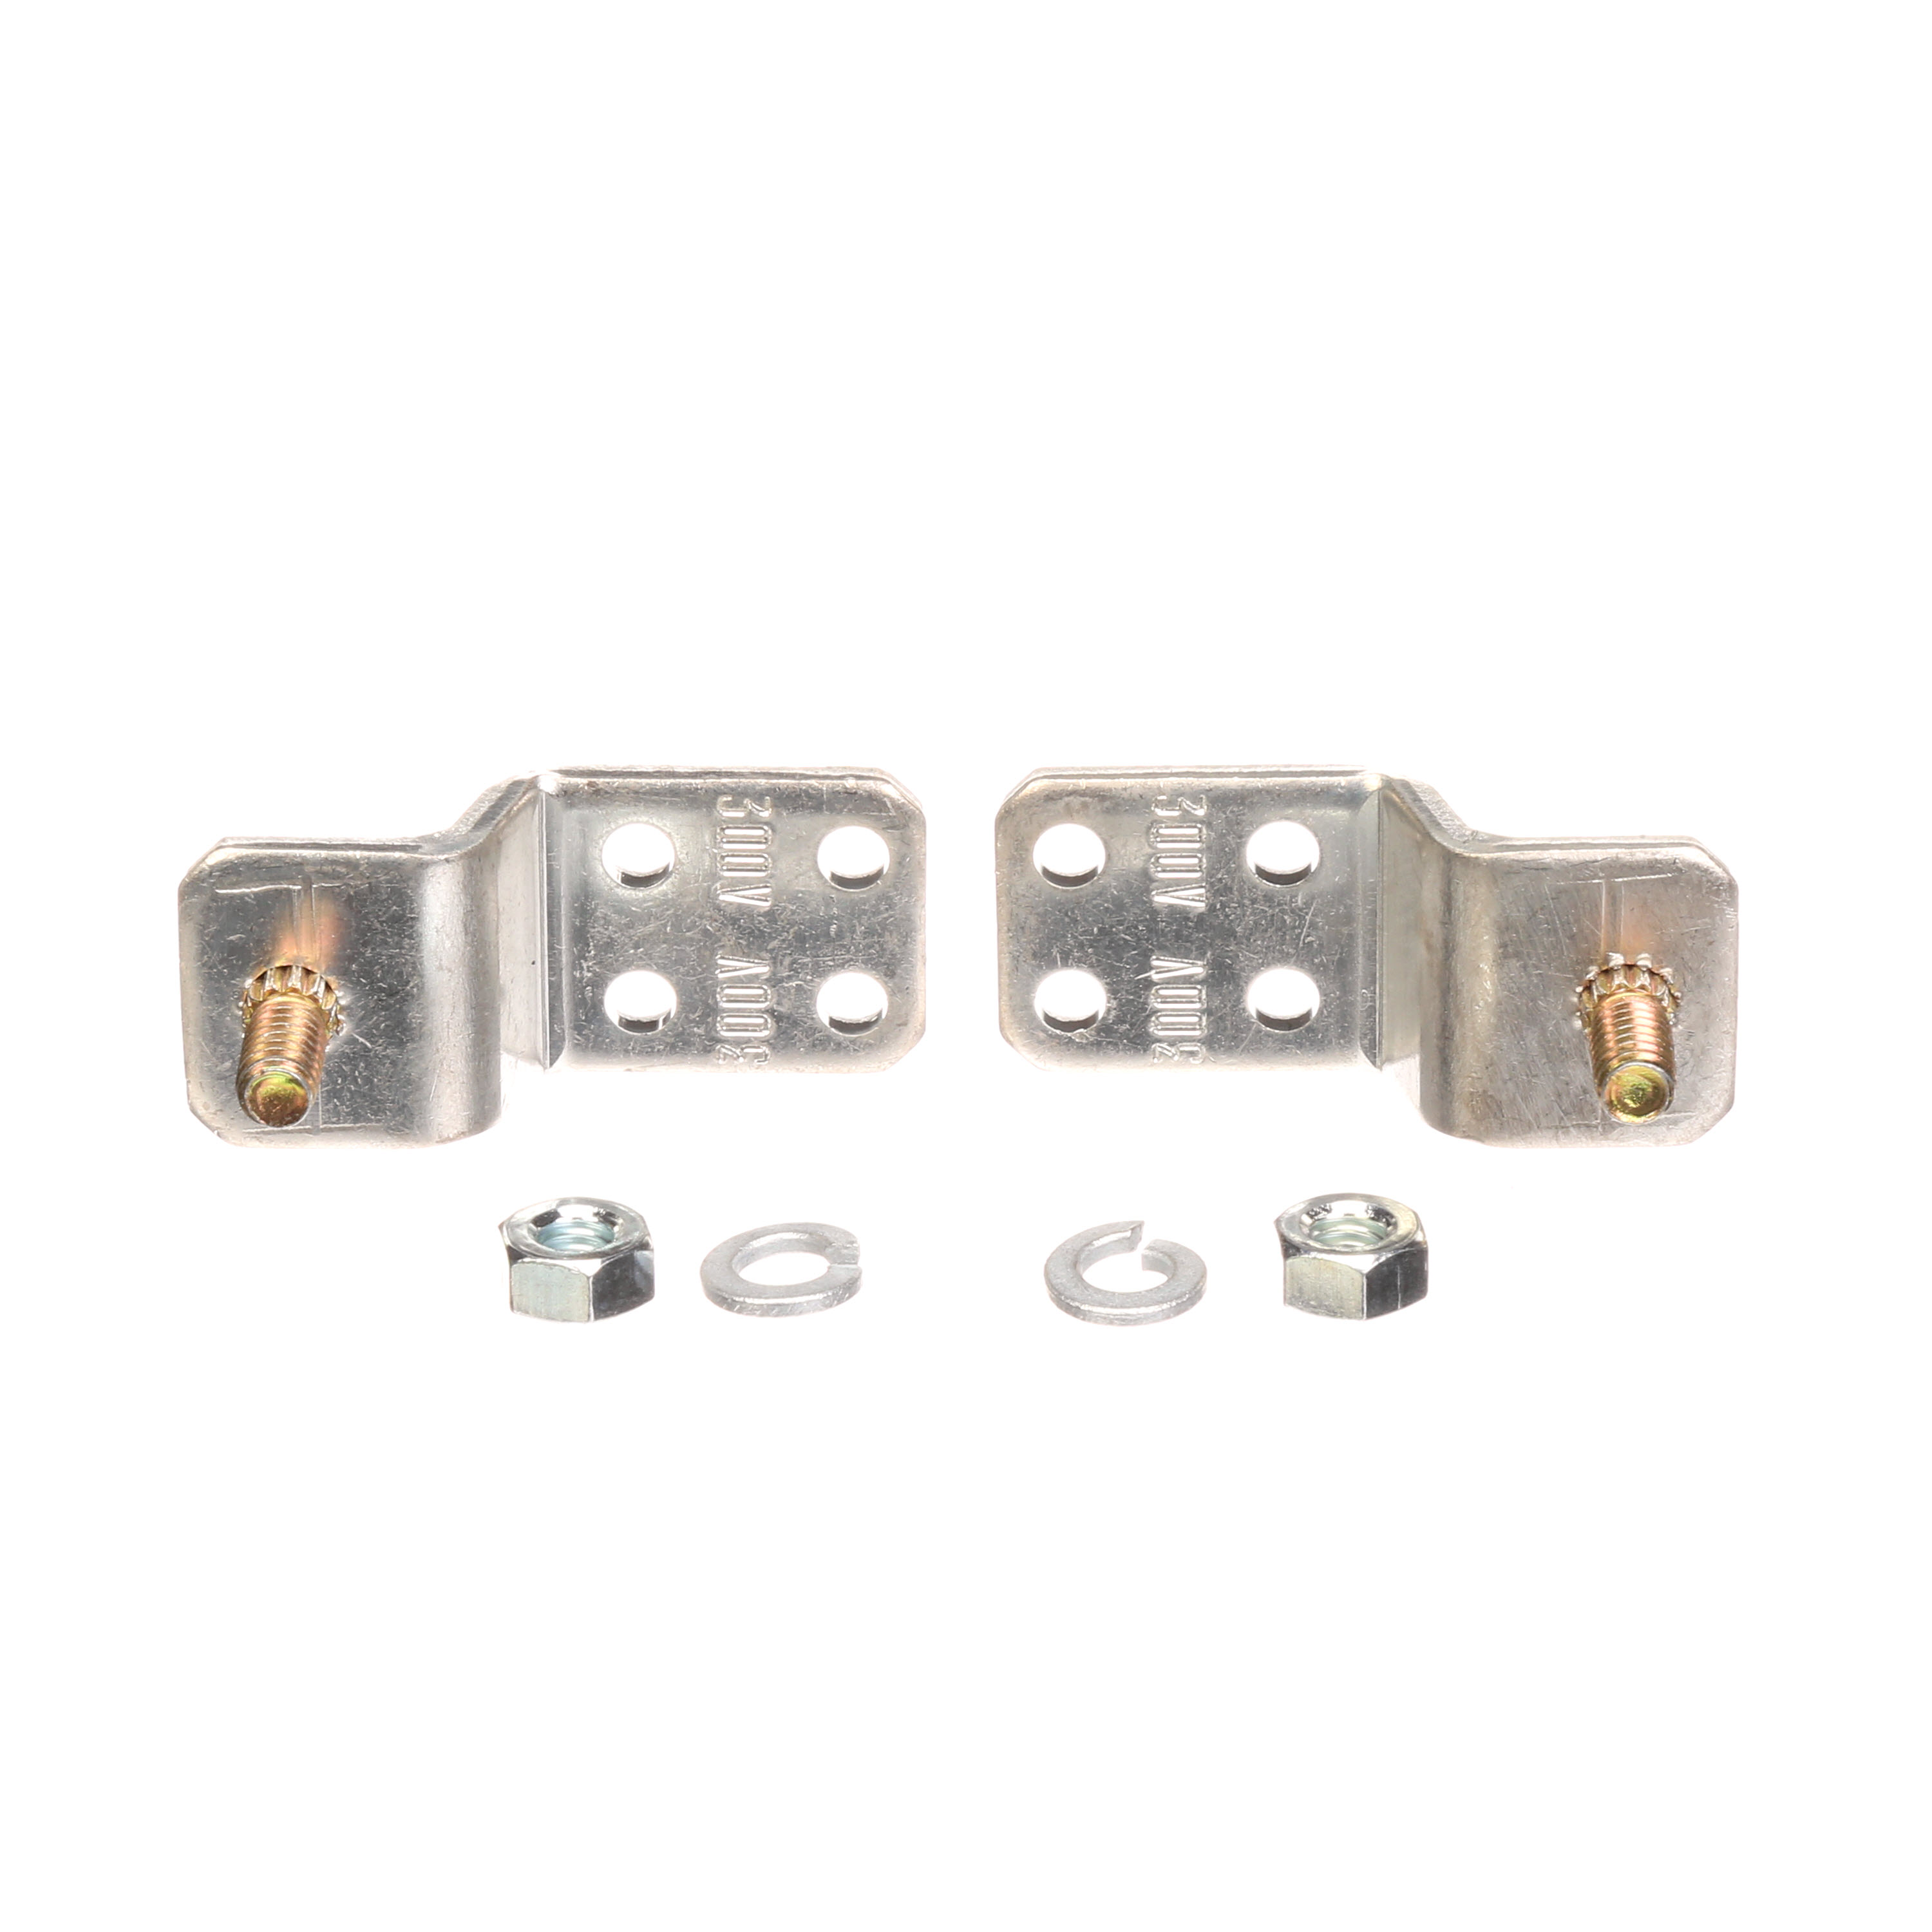 SIEMENS LOW VOLTAGE VBII HEAVY DUTY SAFETY SWITCH ACCESSORY. CLASS T FUSE KIT RATED 240V 200A.